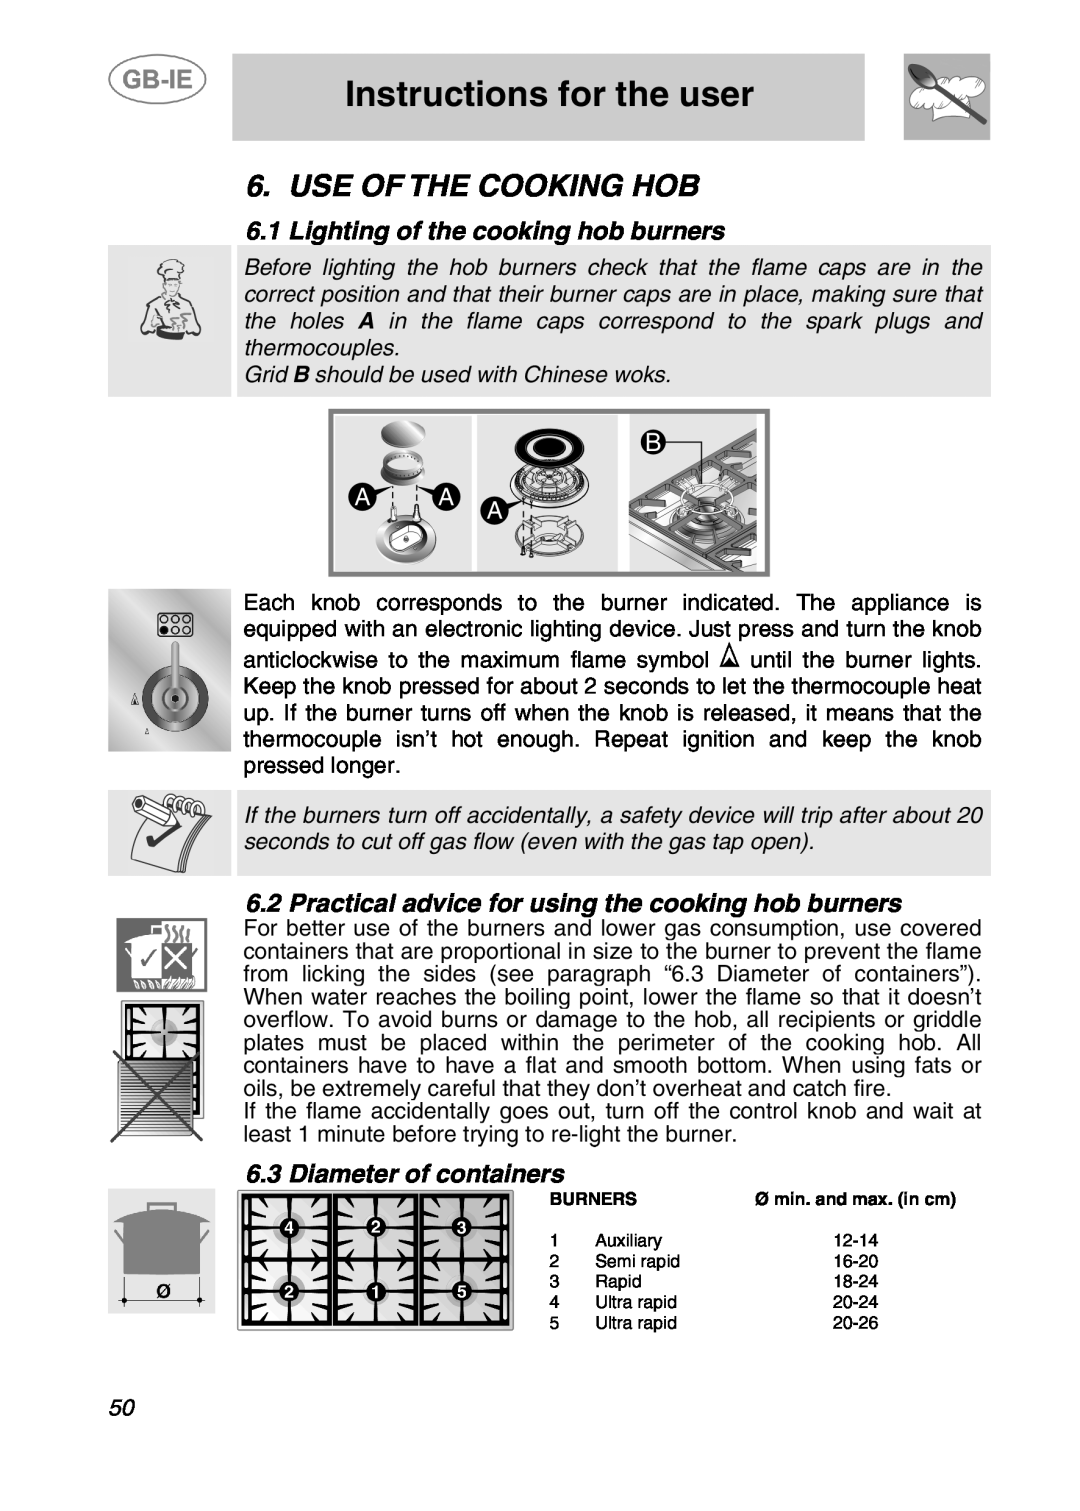 Smeg A2-2 Use Of The Cooking Hob, Lighting of the cooking hob burners, Diameter of containers, Instructions for the user 